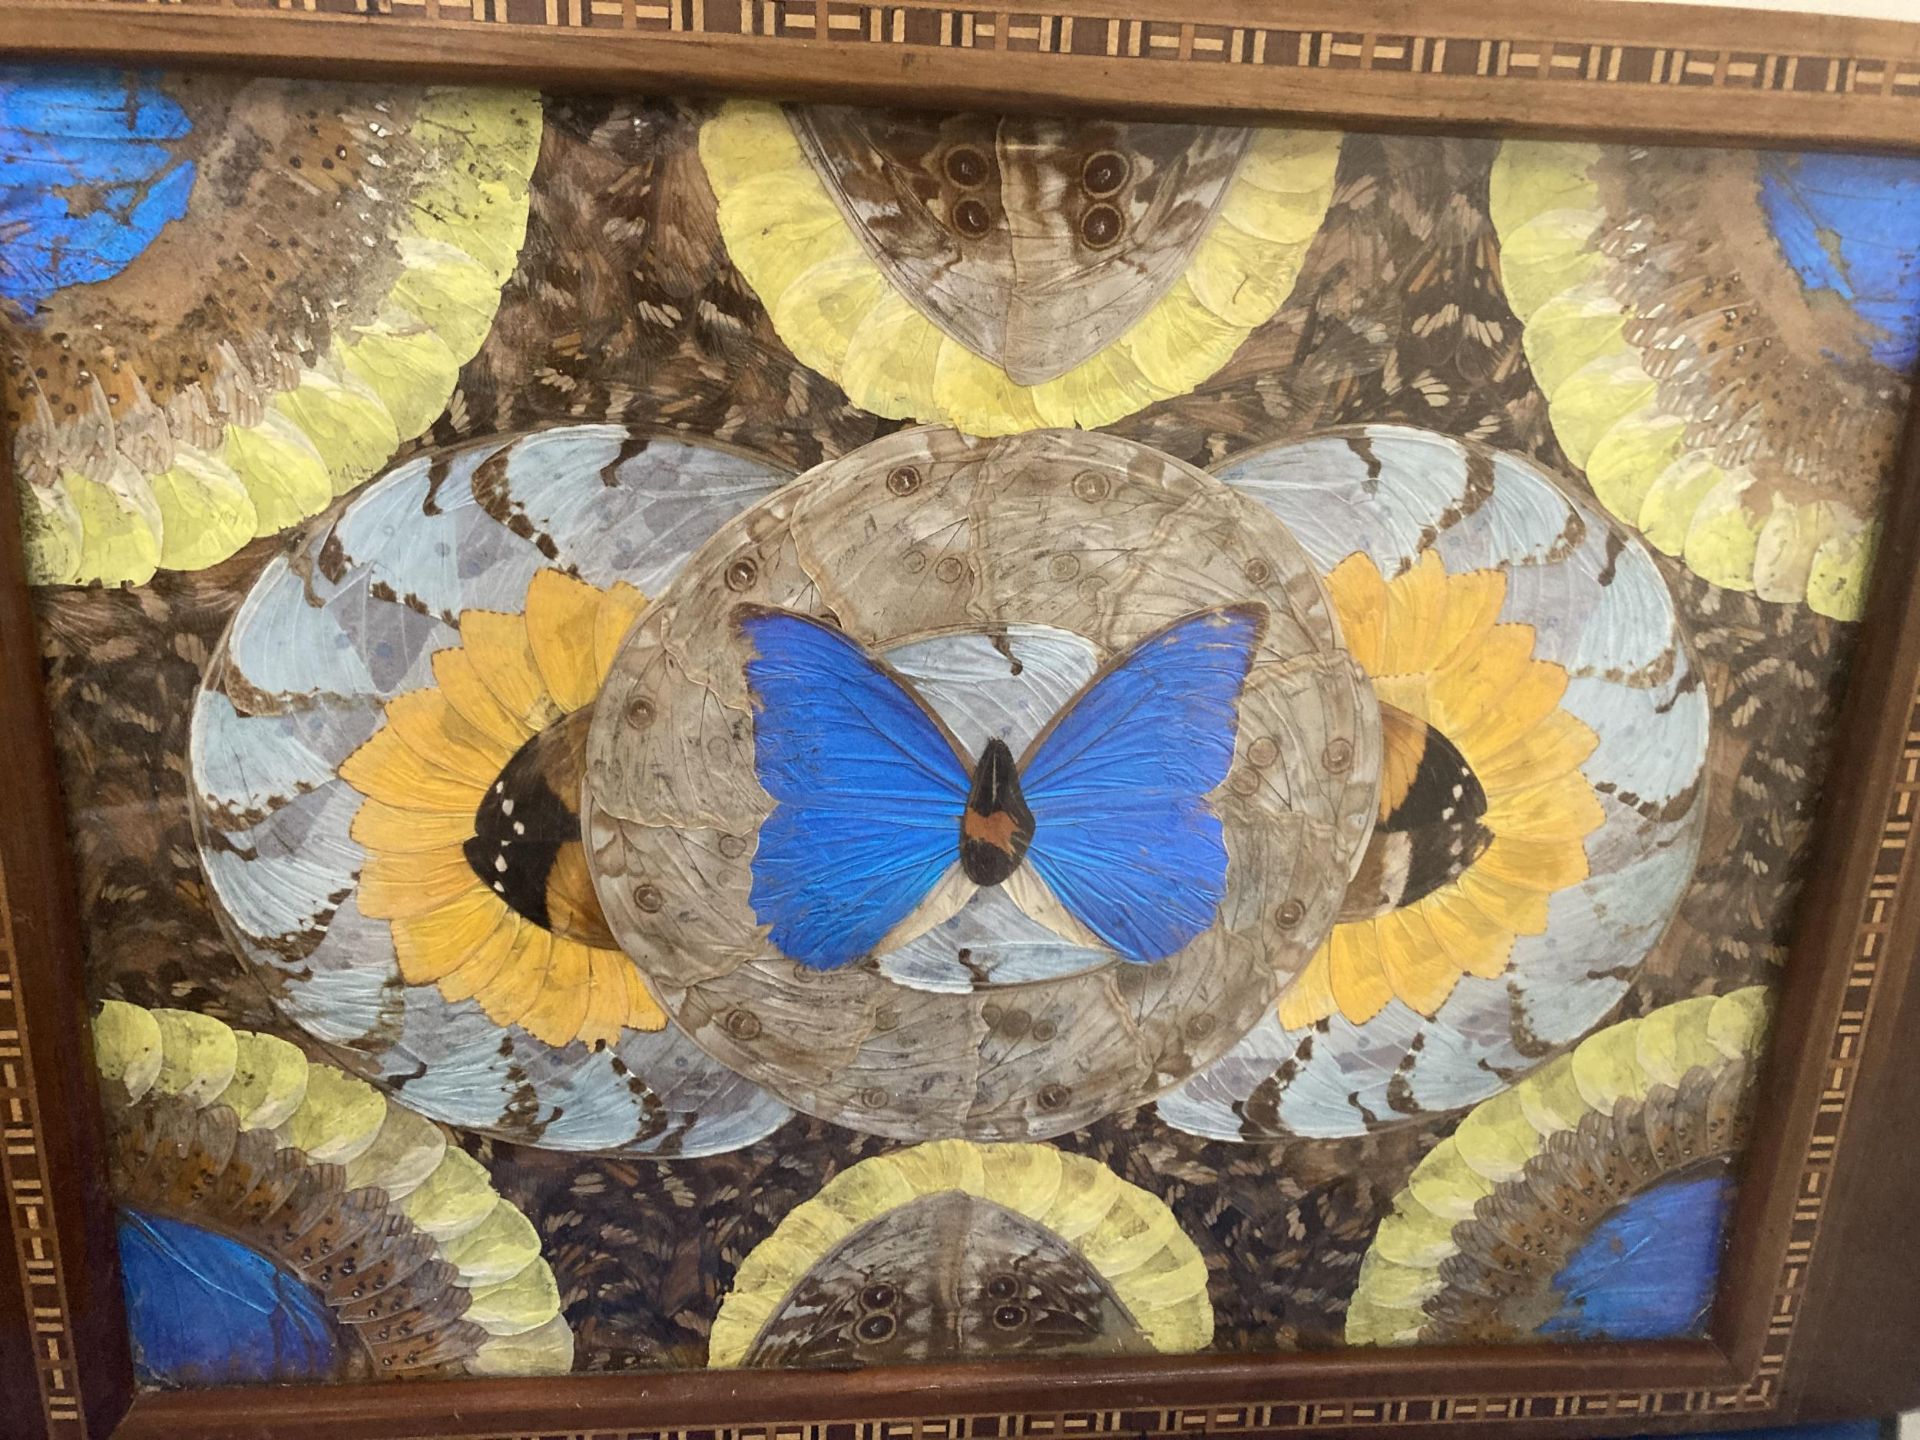 A VINTAGE INLAID WOODEN TRAY WITH BUTTERFLIES